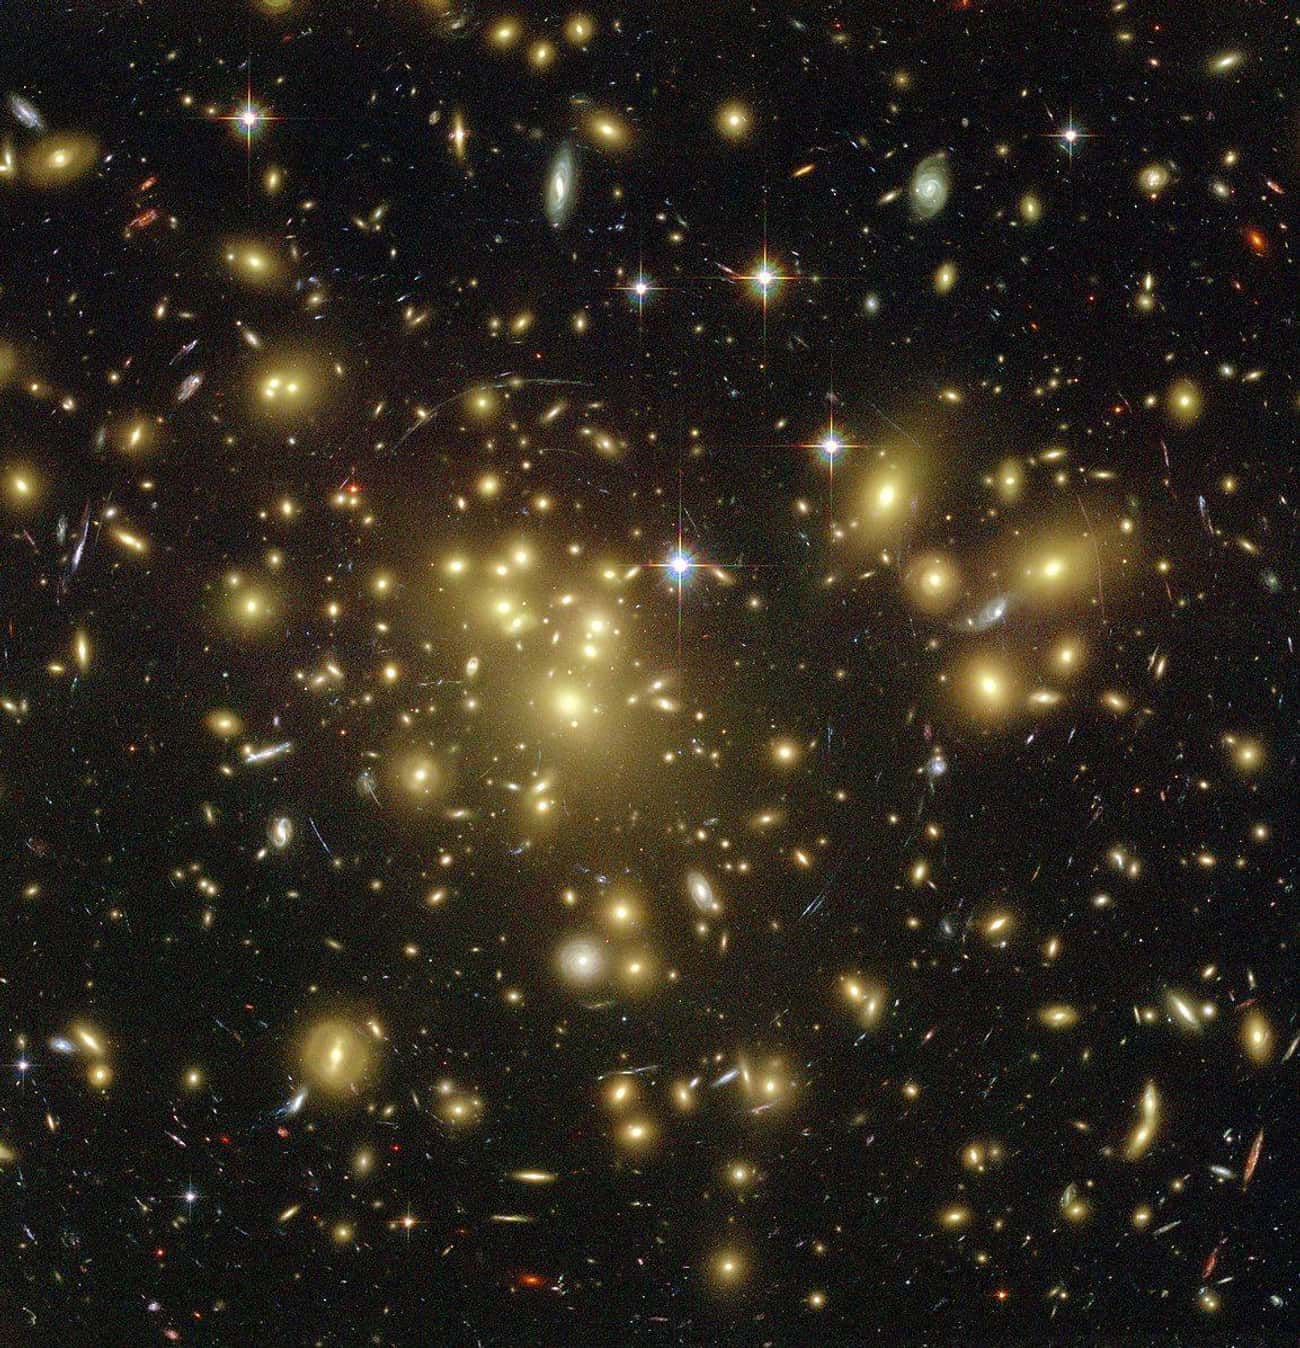 96% Of The Universe Is Comprised Of Invisible Dark Matter And Dark Energy